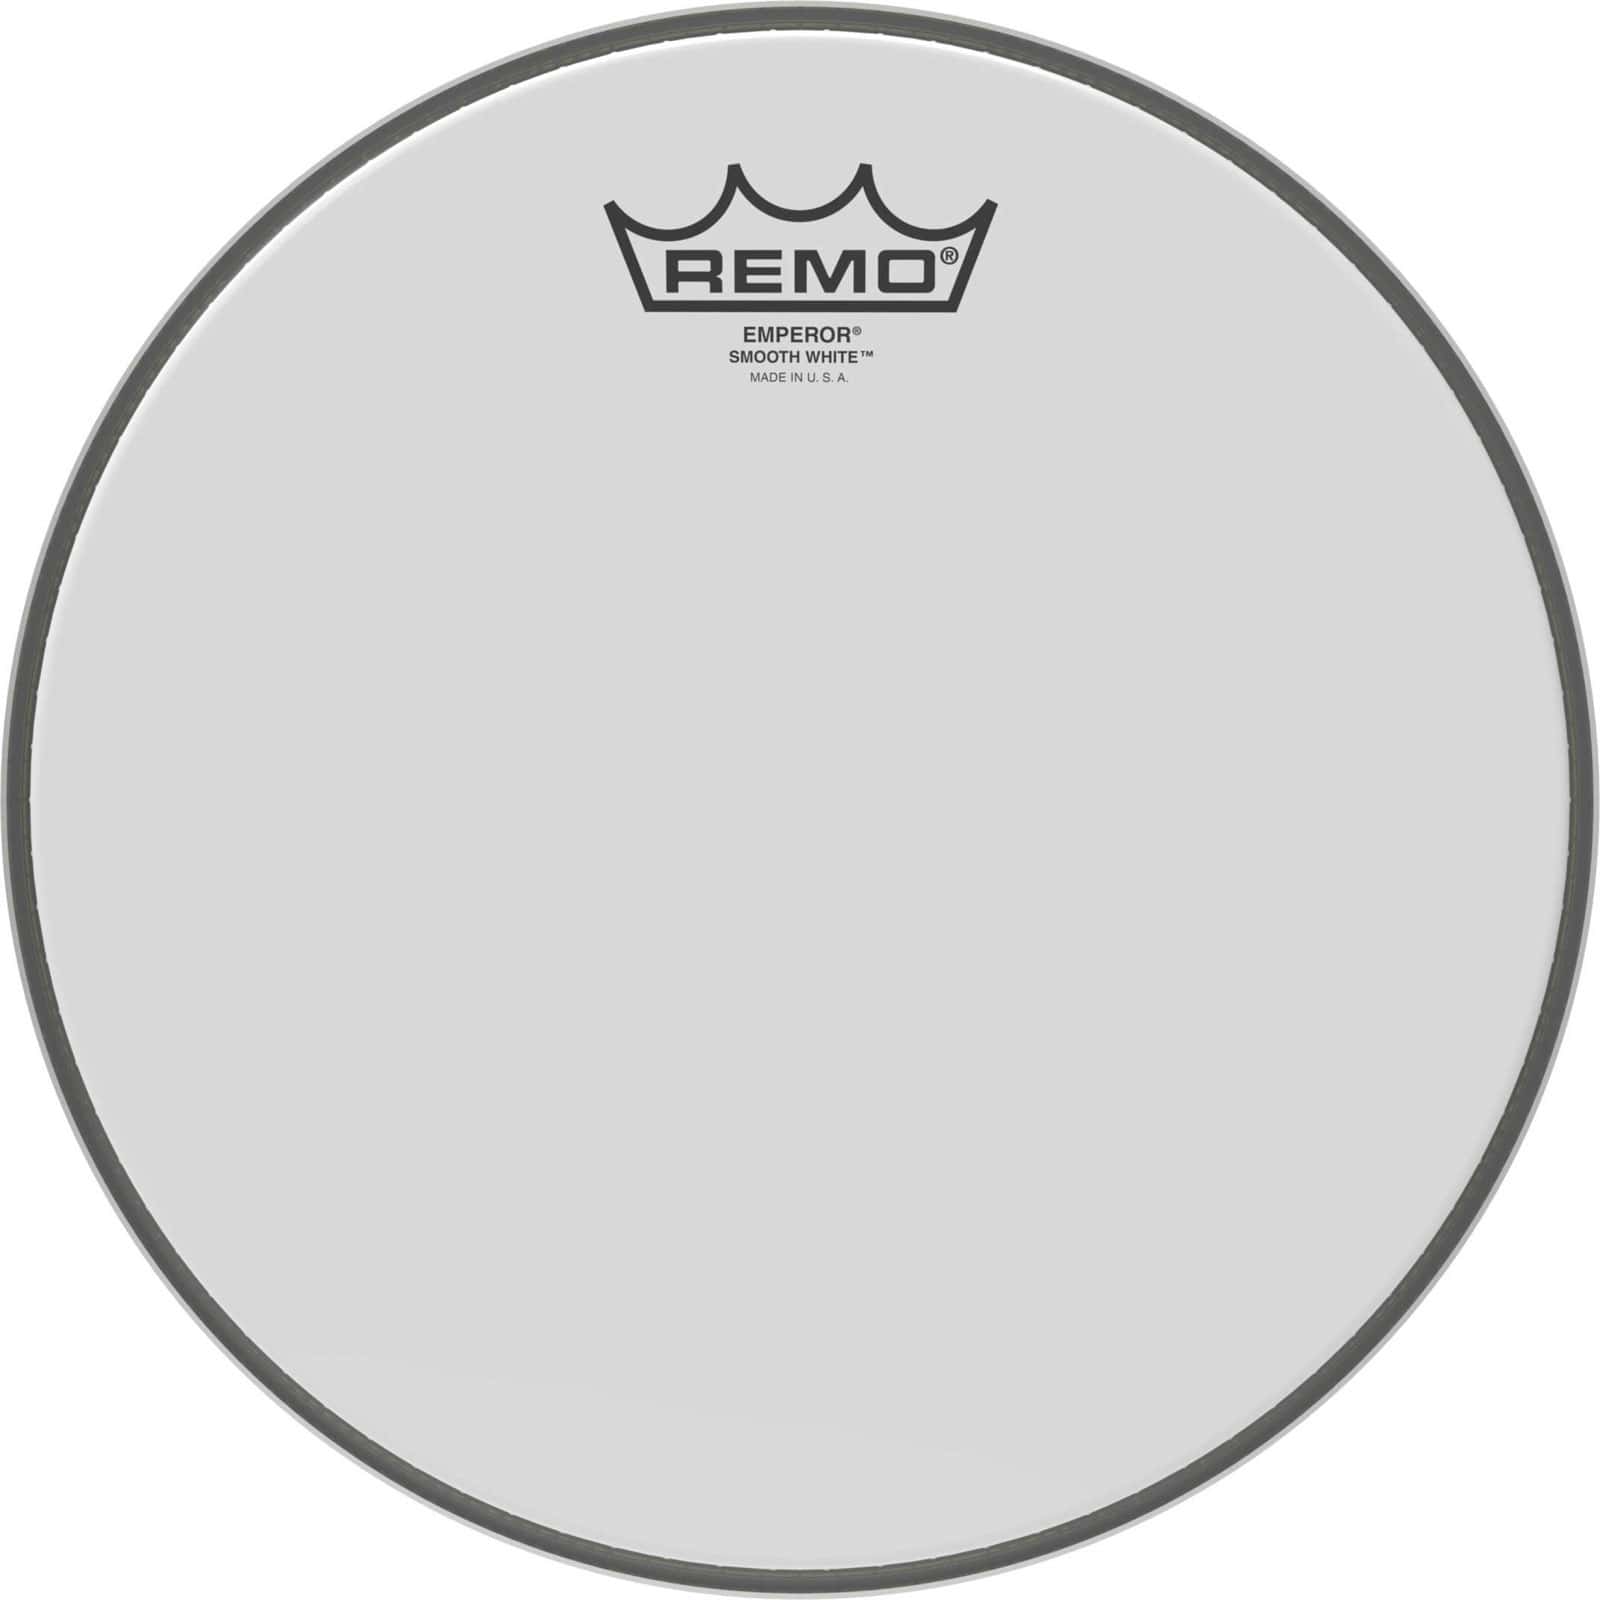 REMO BE-0210-00 EMPEROR SMOOTH WHITE 10